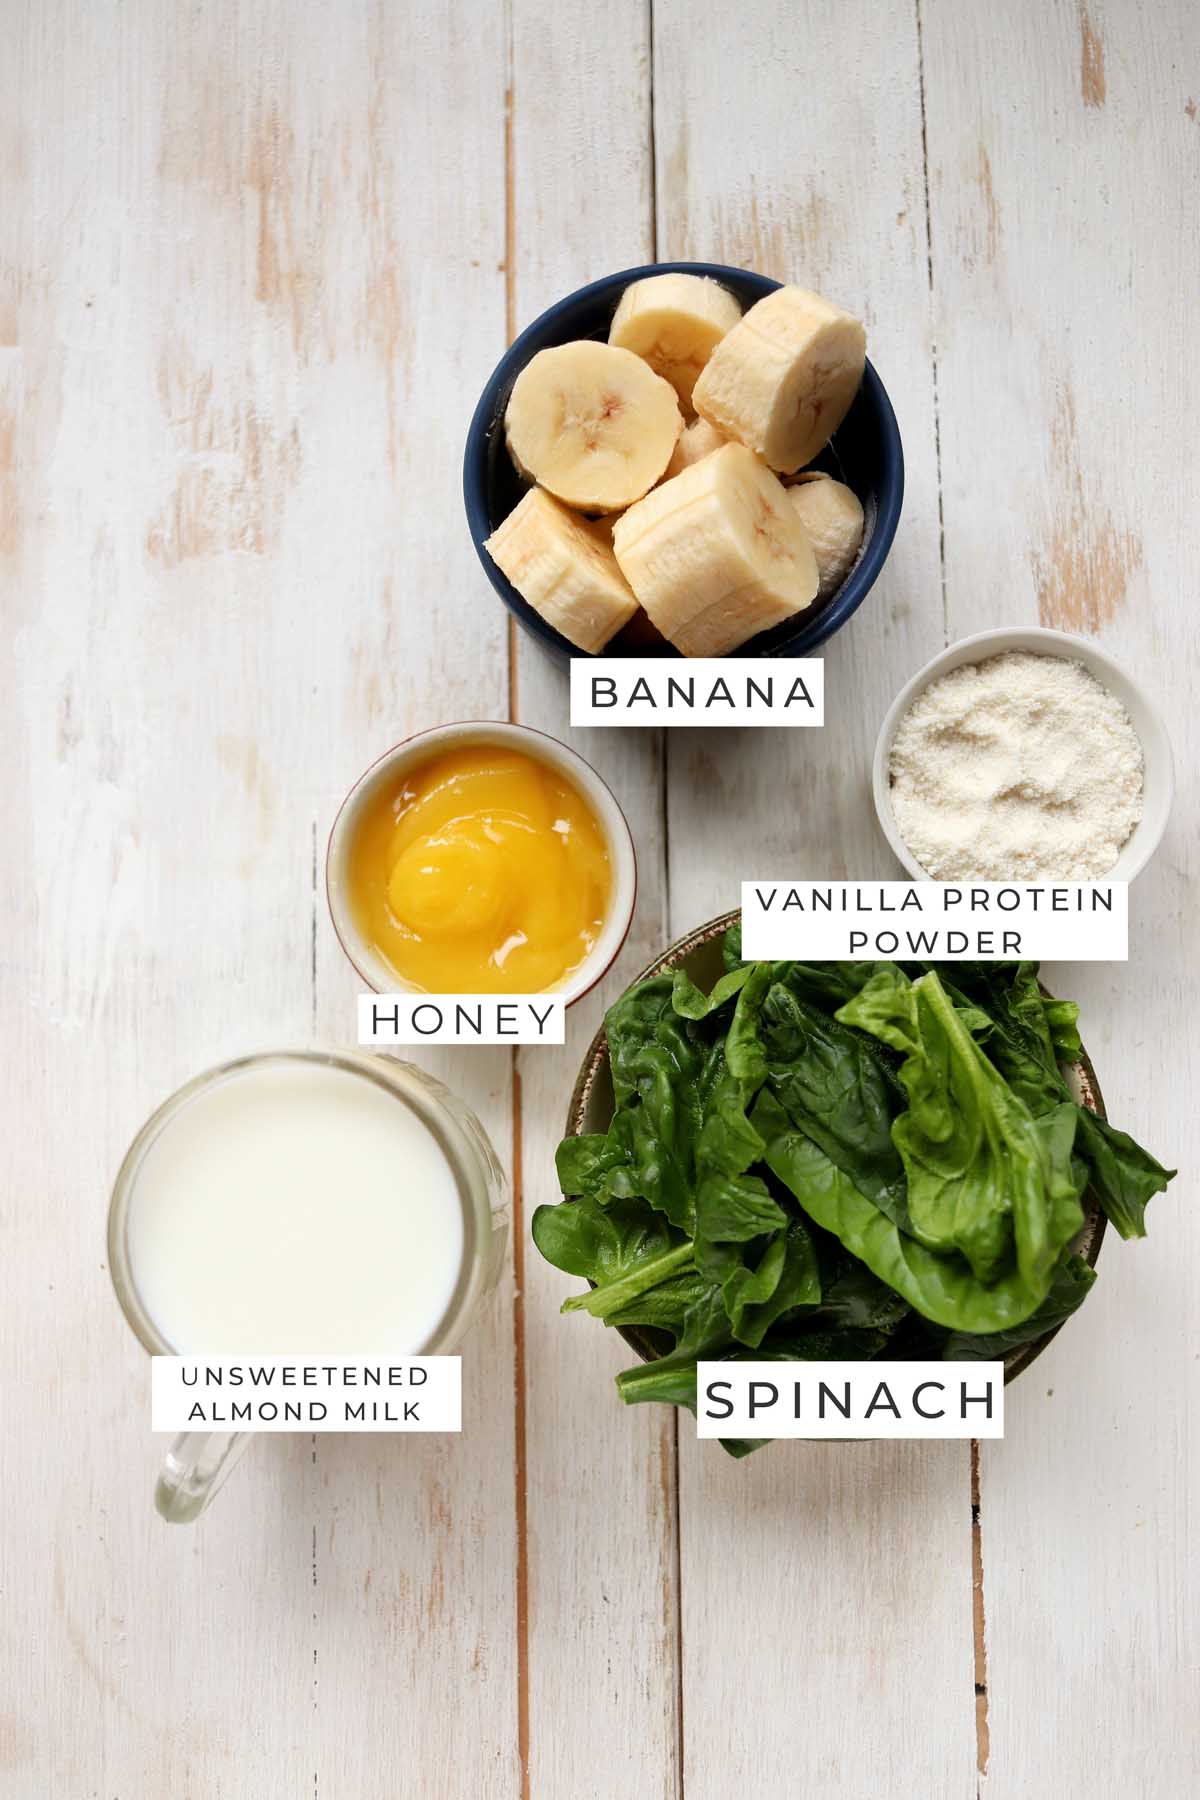 Labeled ingredients for the green smoothie.